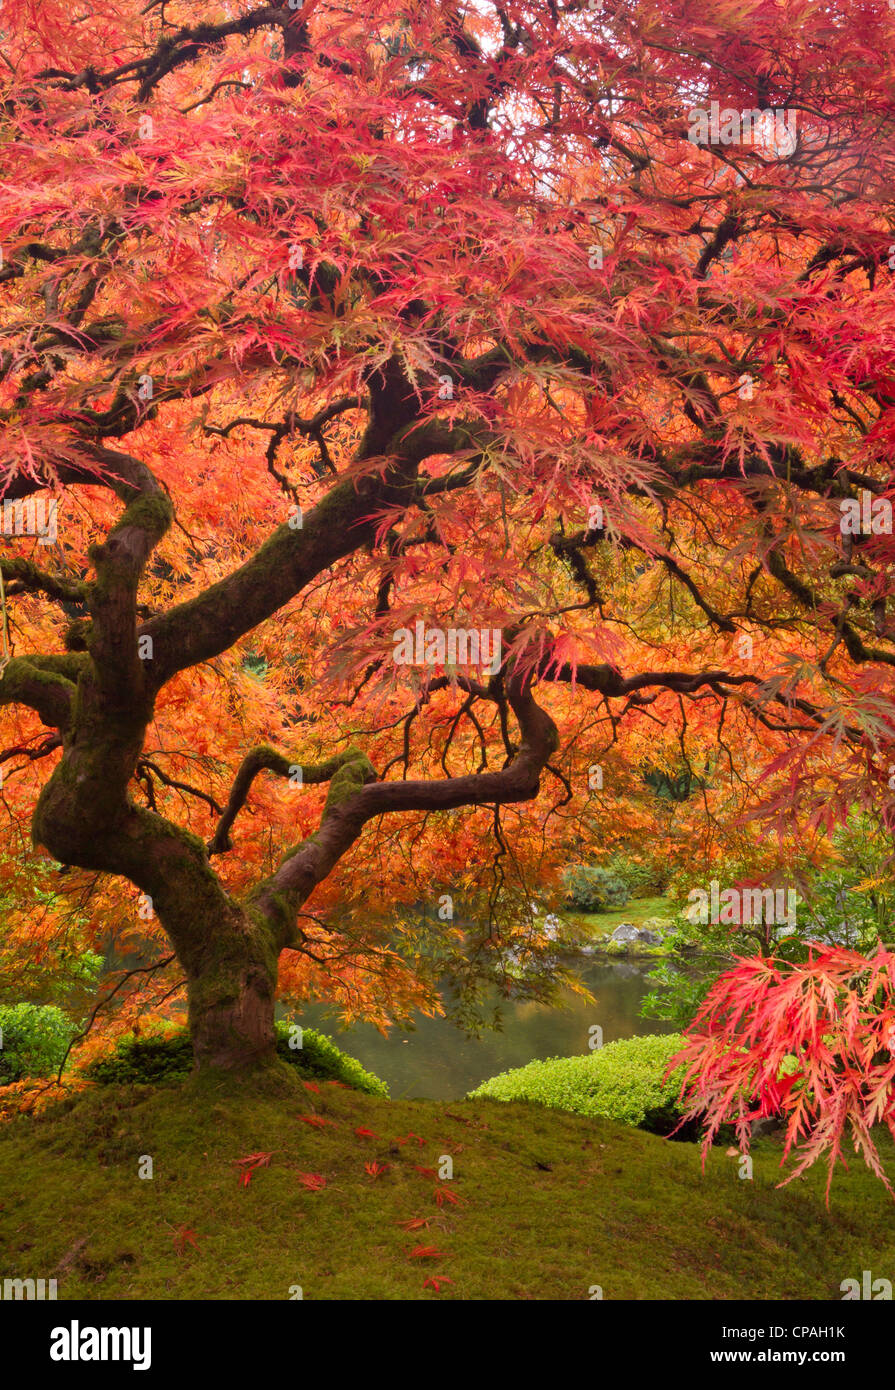 Japanese maple in fall color, Portland Japanese Garden, Oregon.  (Not available for 2020 calendar covers in German speaking countries) Stock Photo